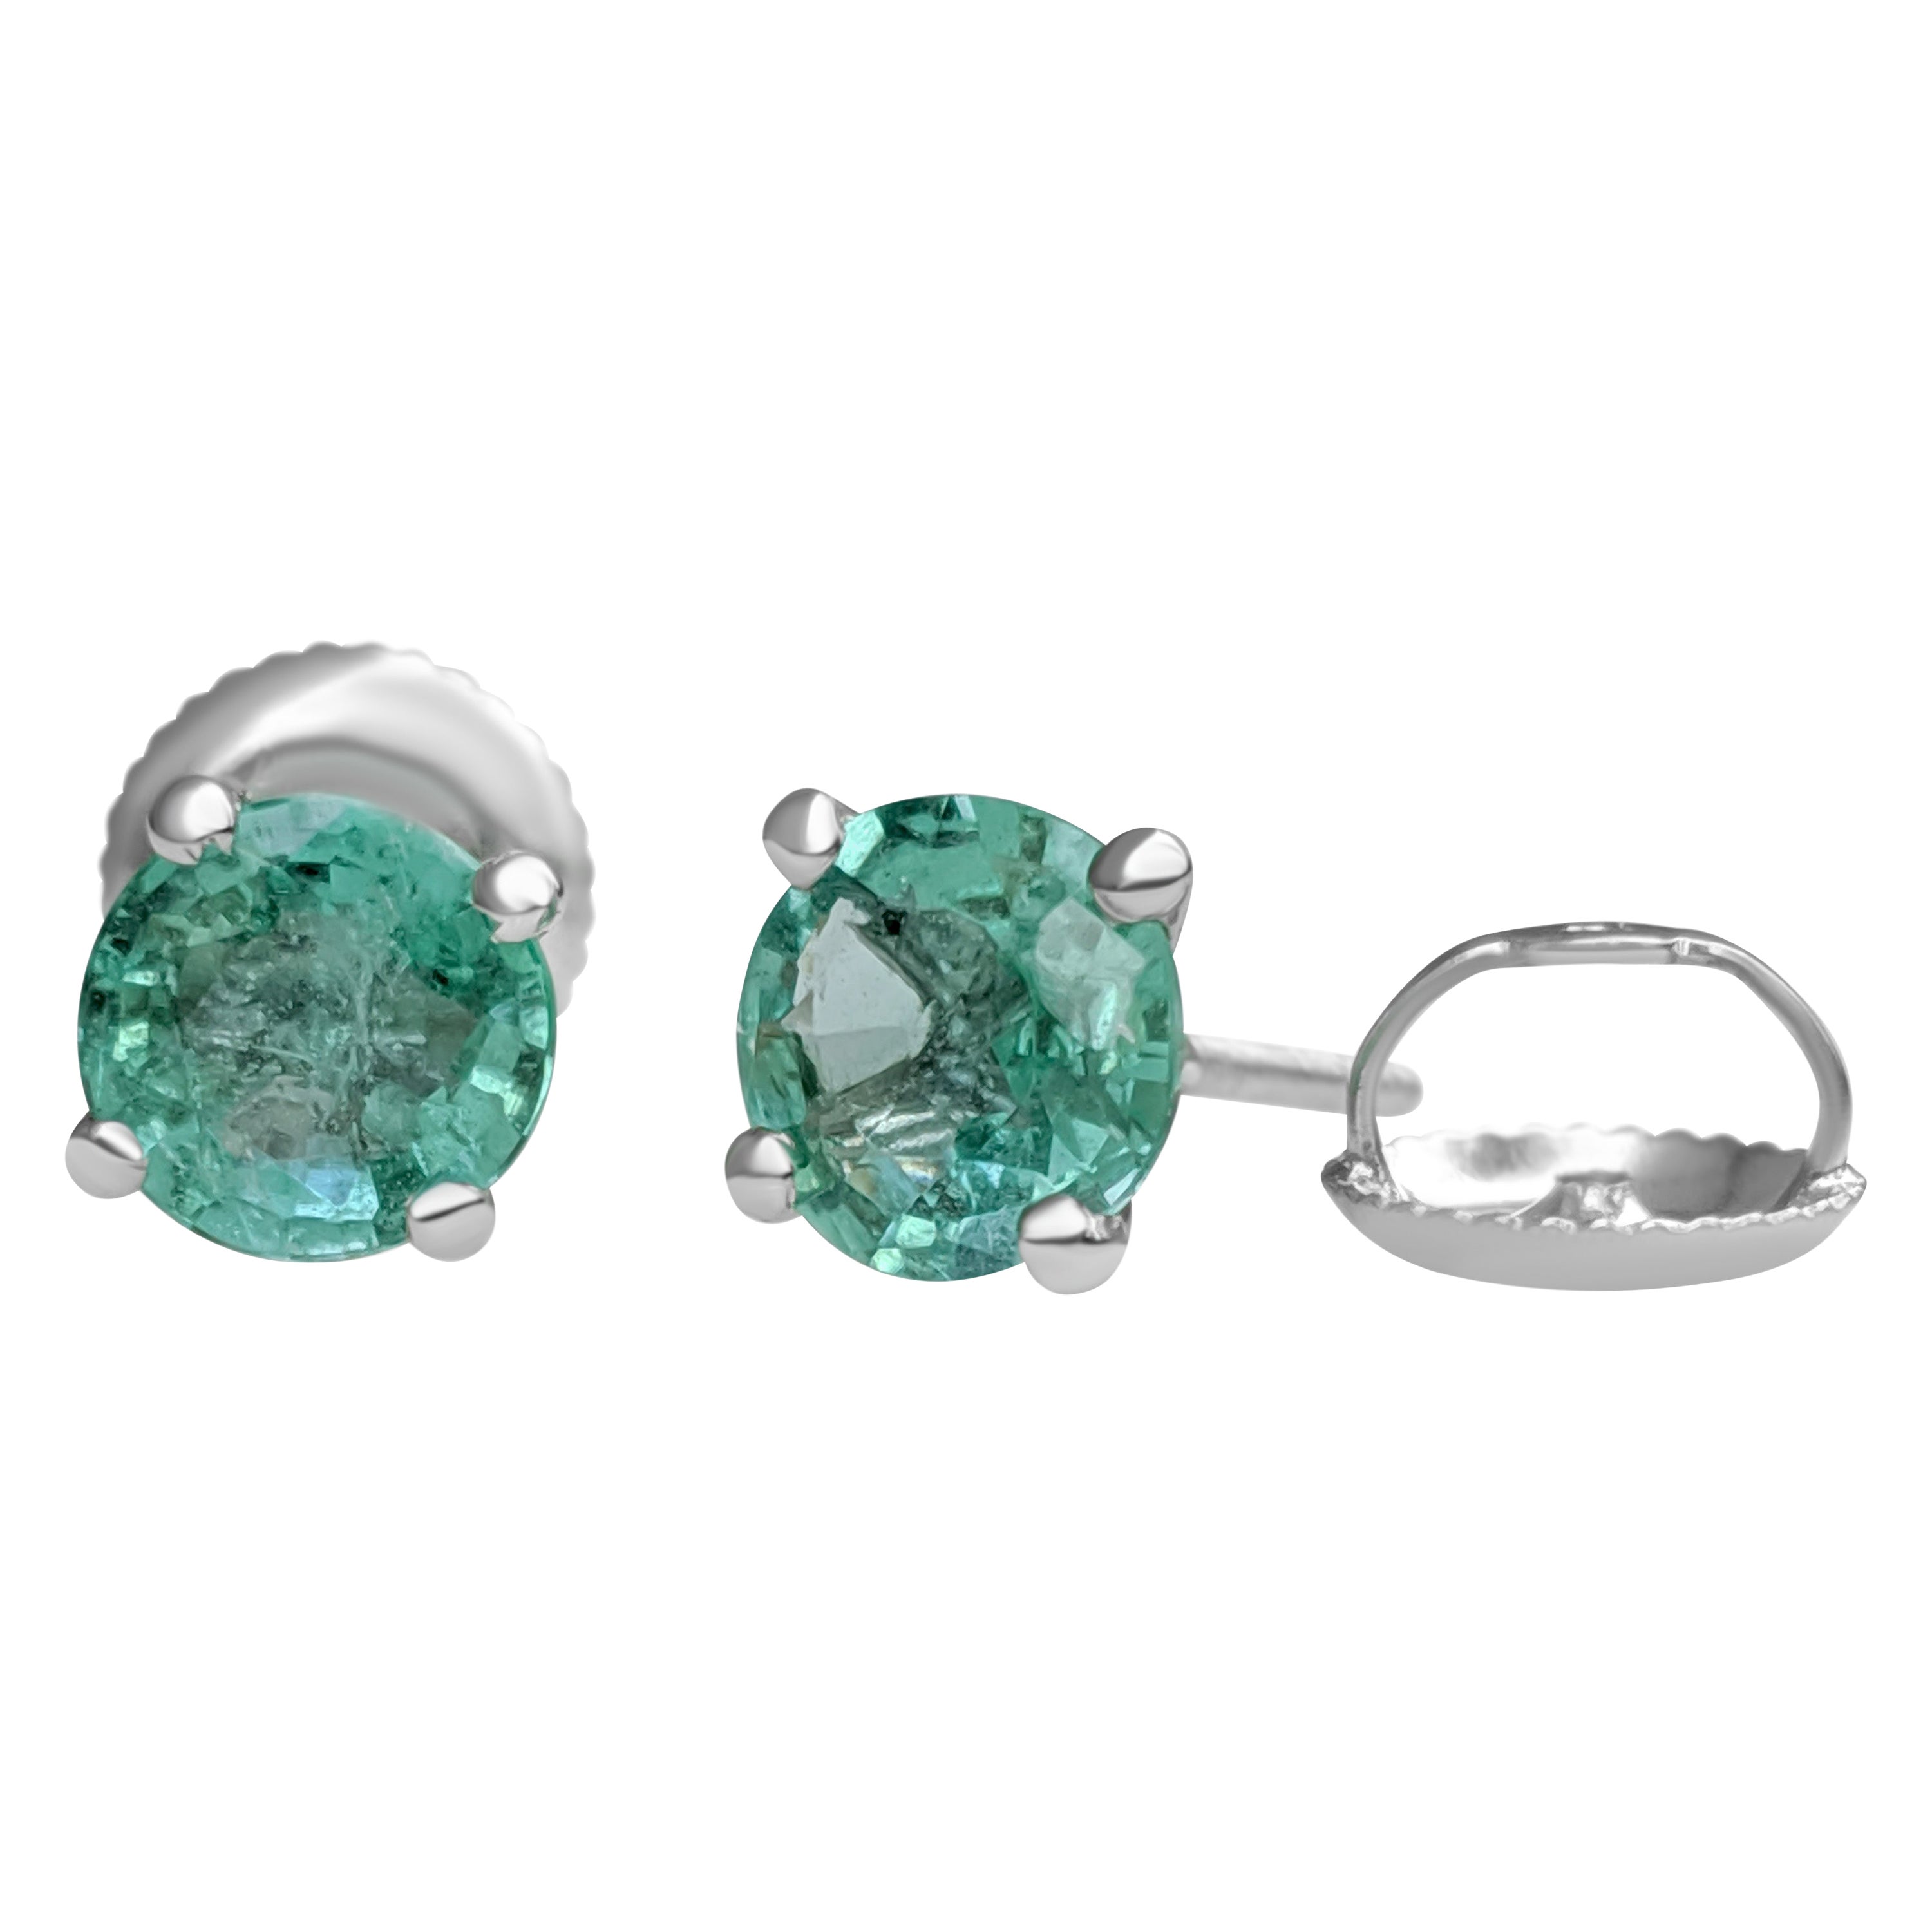 NO RESERVE! 1.20 Ct Emerald - 14 kt. White gold - Earrings For Sale